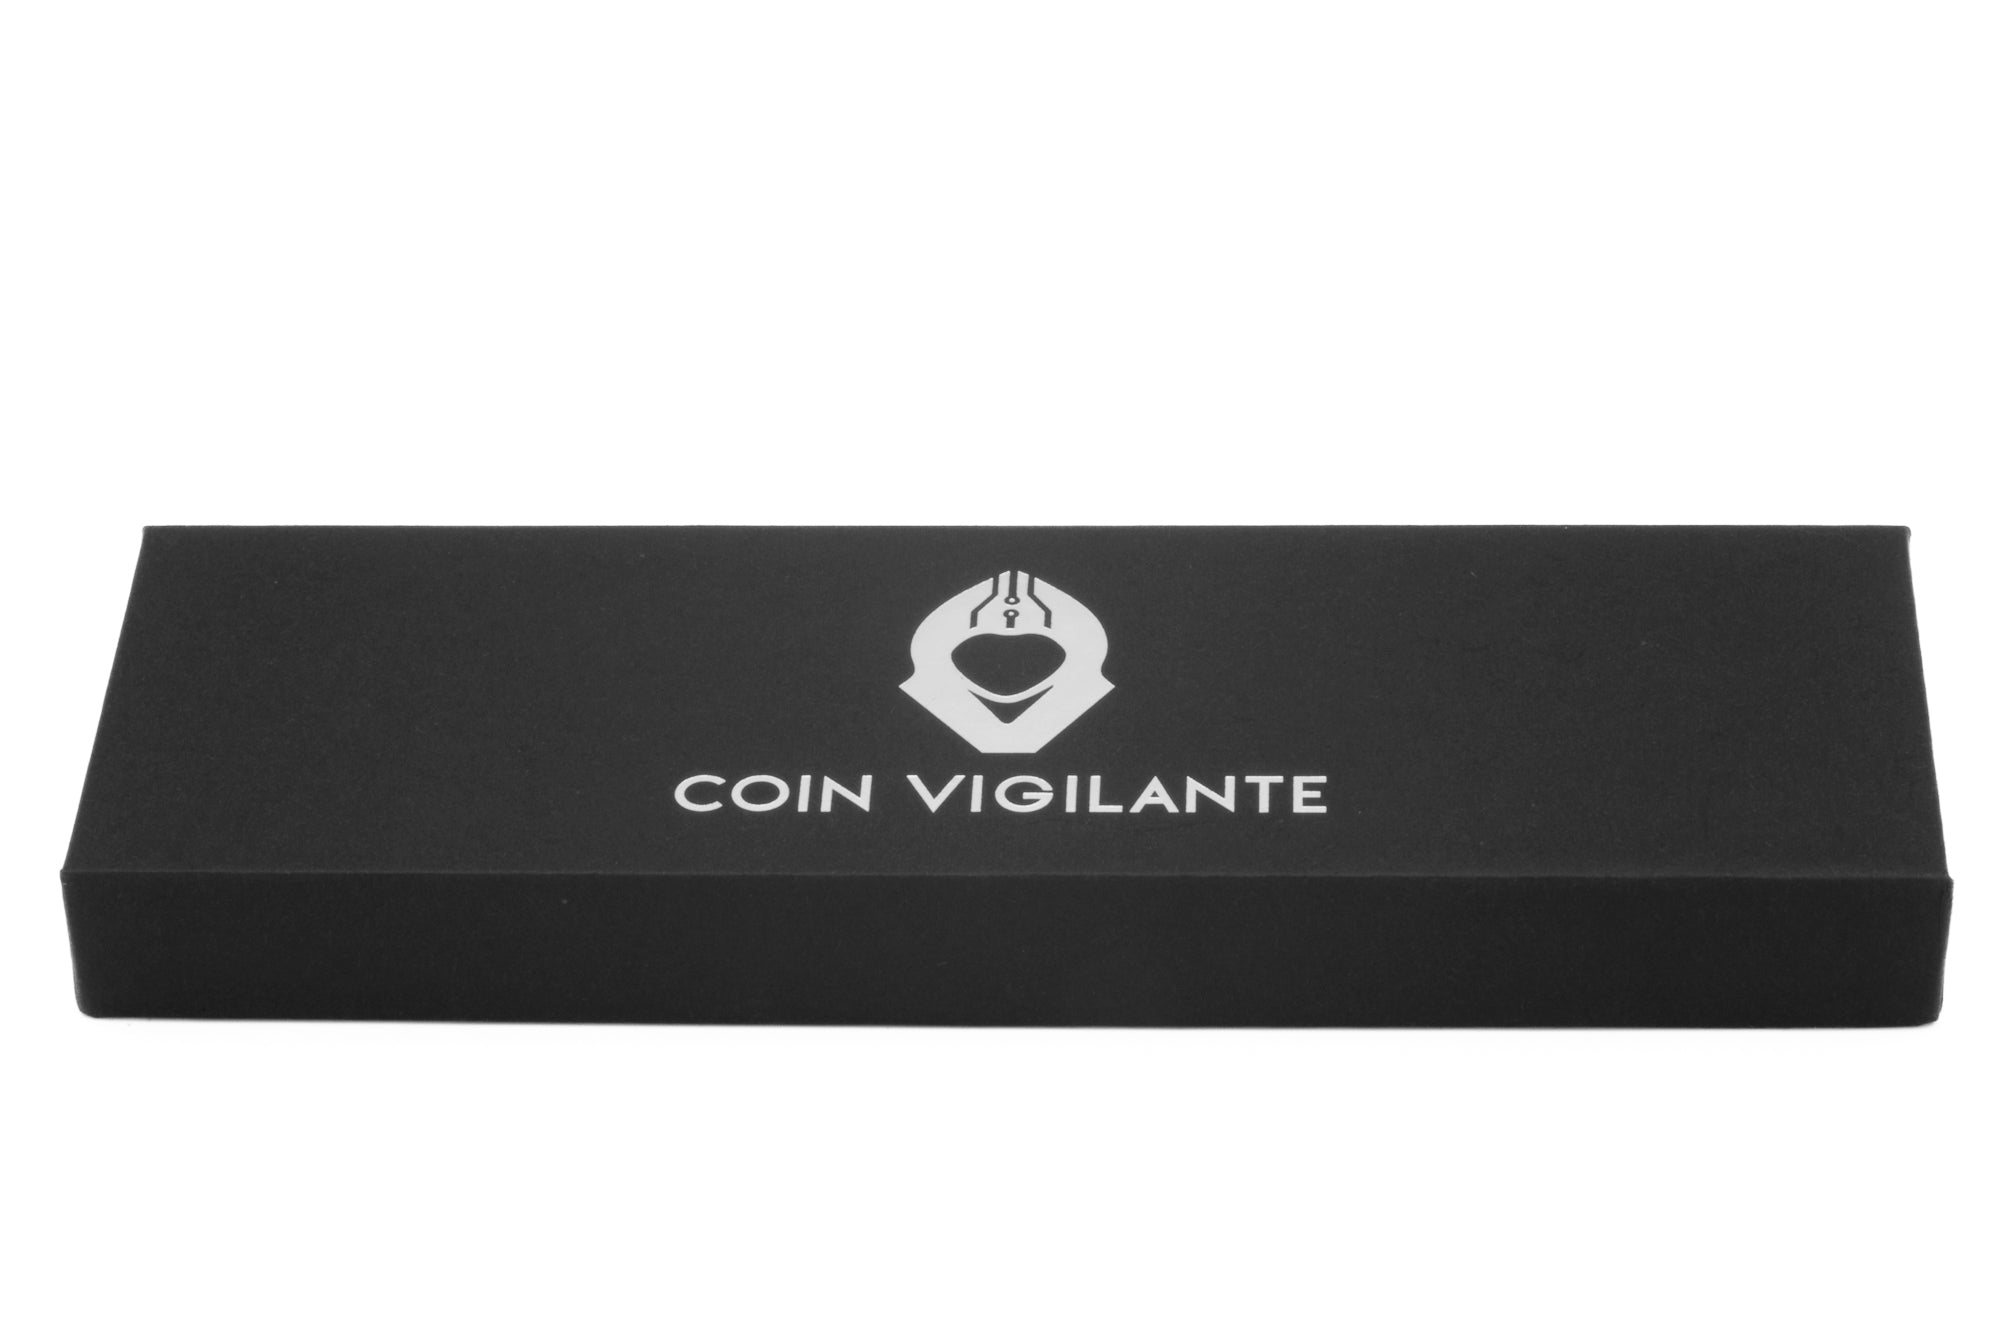 Adjustment tool included with the Coin Vigilante Silver Stainless Steel Mesh Band